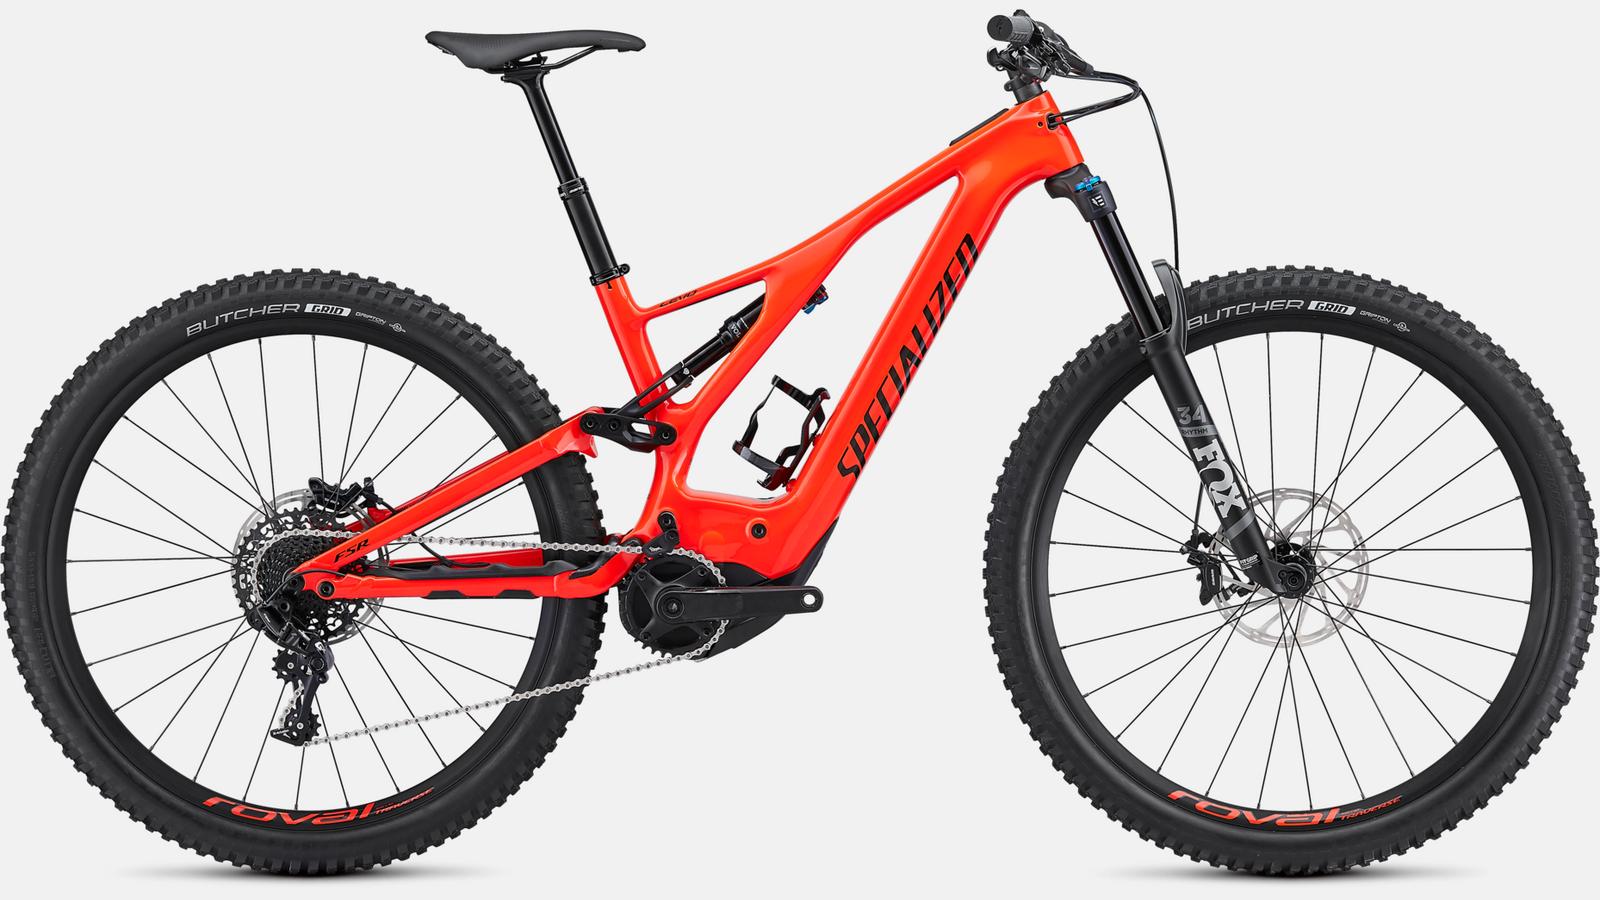 Paint for 2019 Specialized Turbo Levo Comp Carbon - Gloss Rocket Red